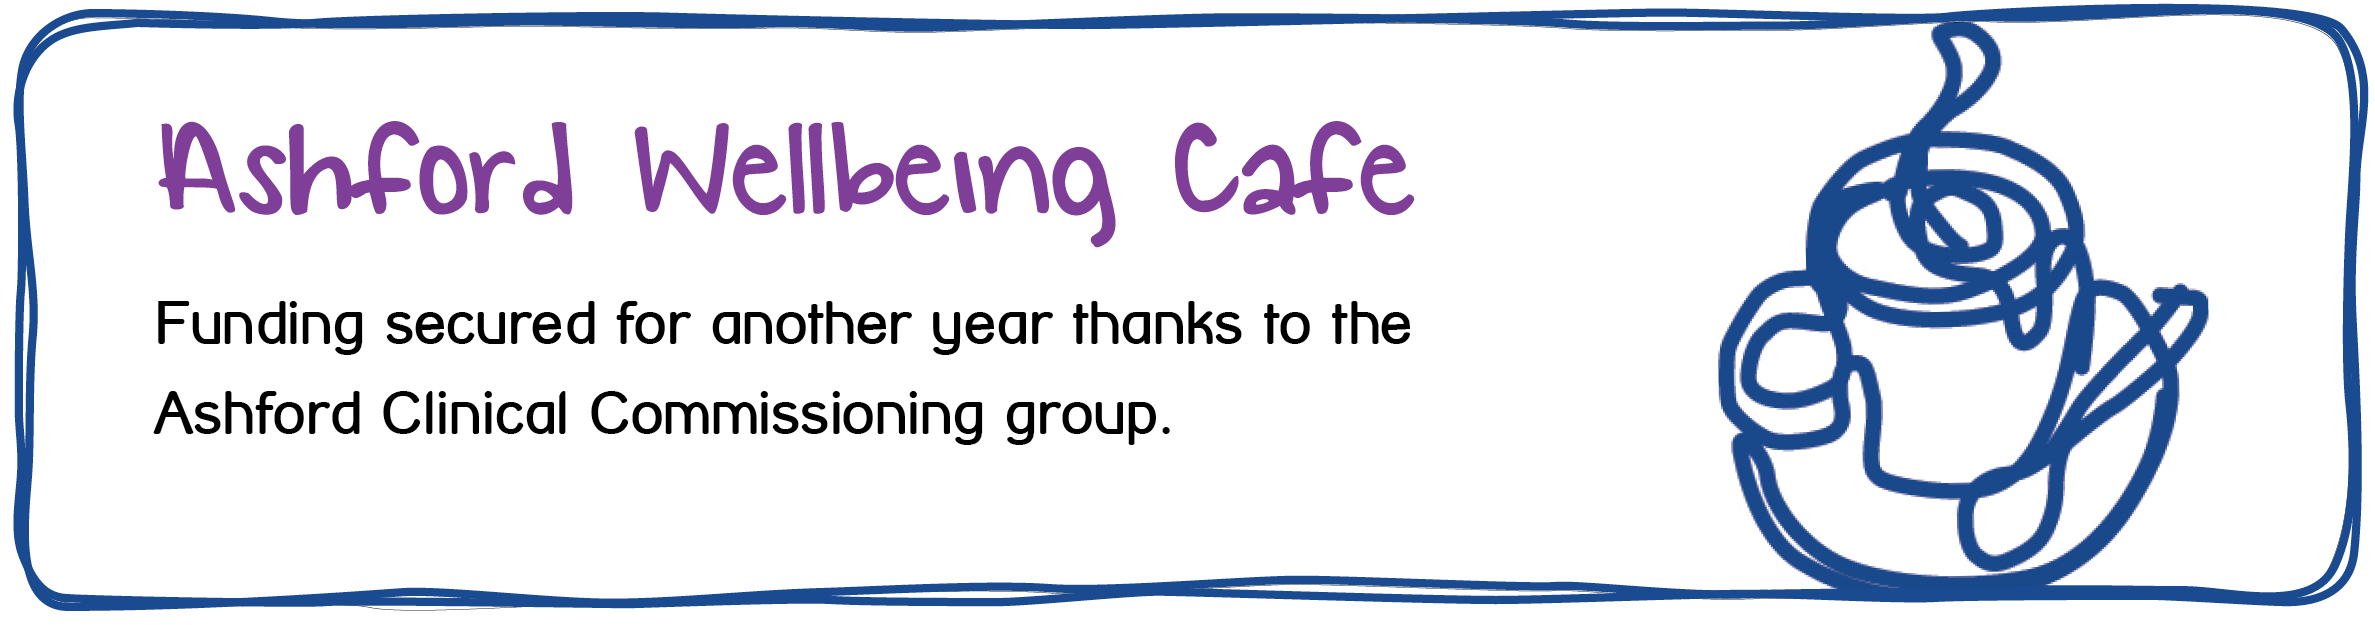 Our Ashford Wellbeing Cafe has secured funding for another year thanks to the Ashford Clinical Commissioning Group.